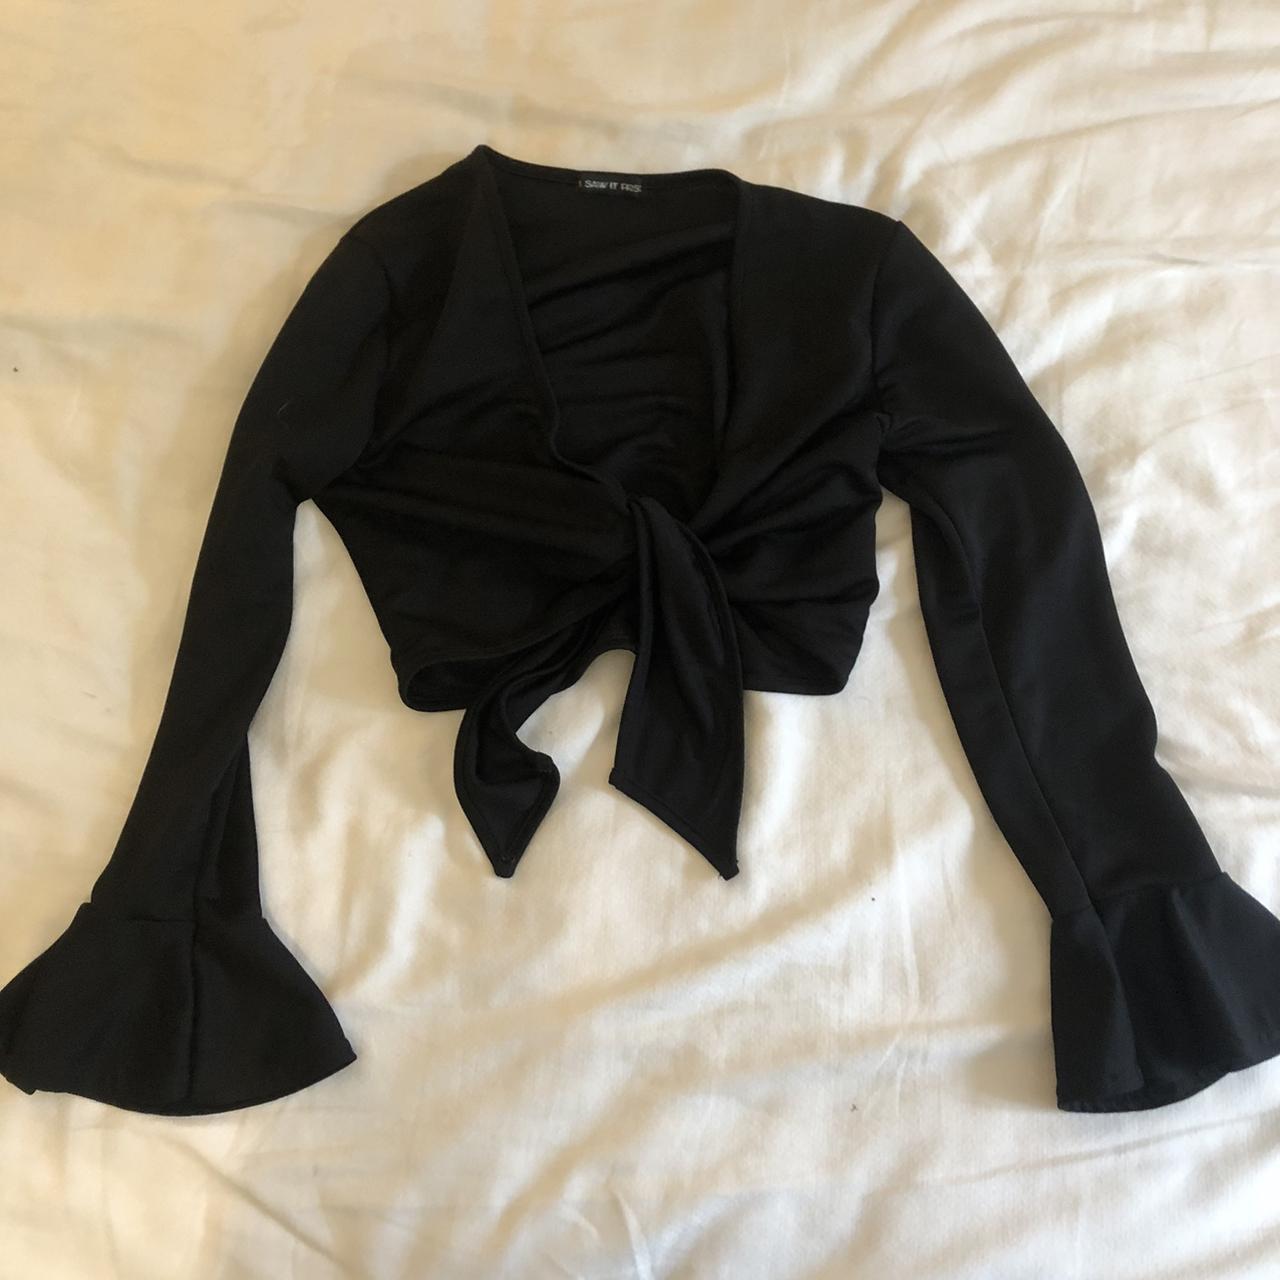 Black tie front cropped top with flares sleeved!... - Depop